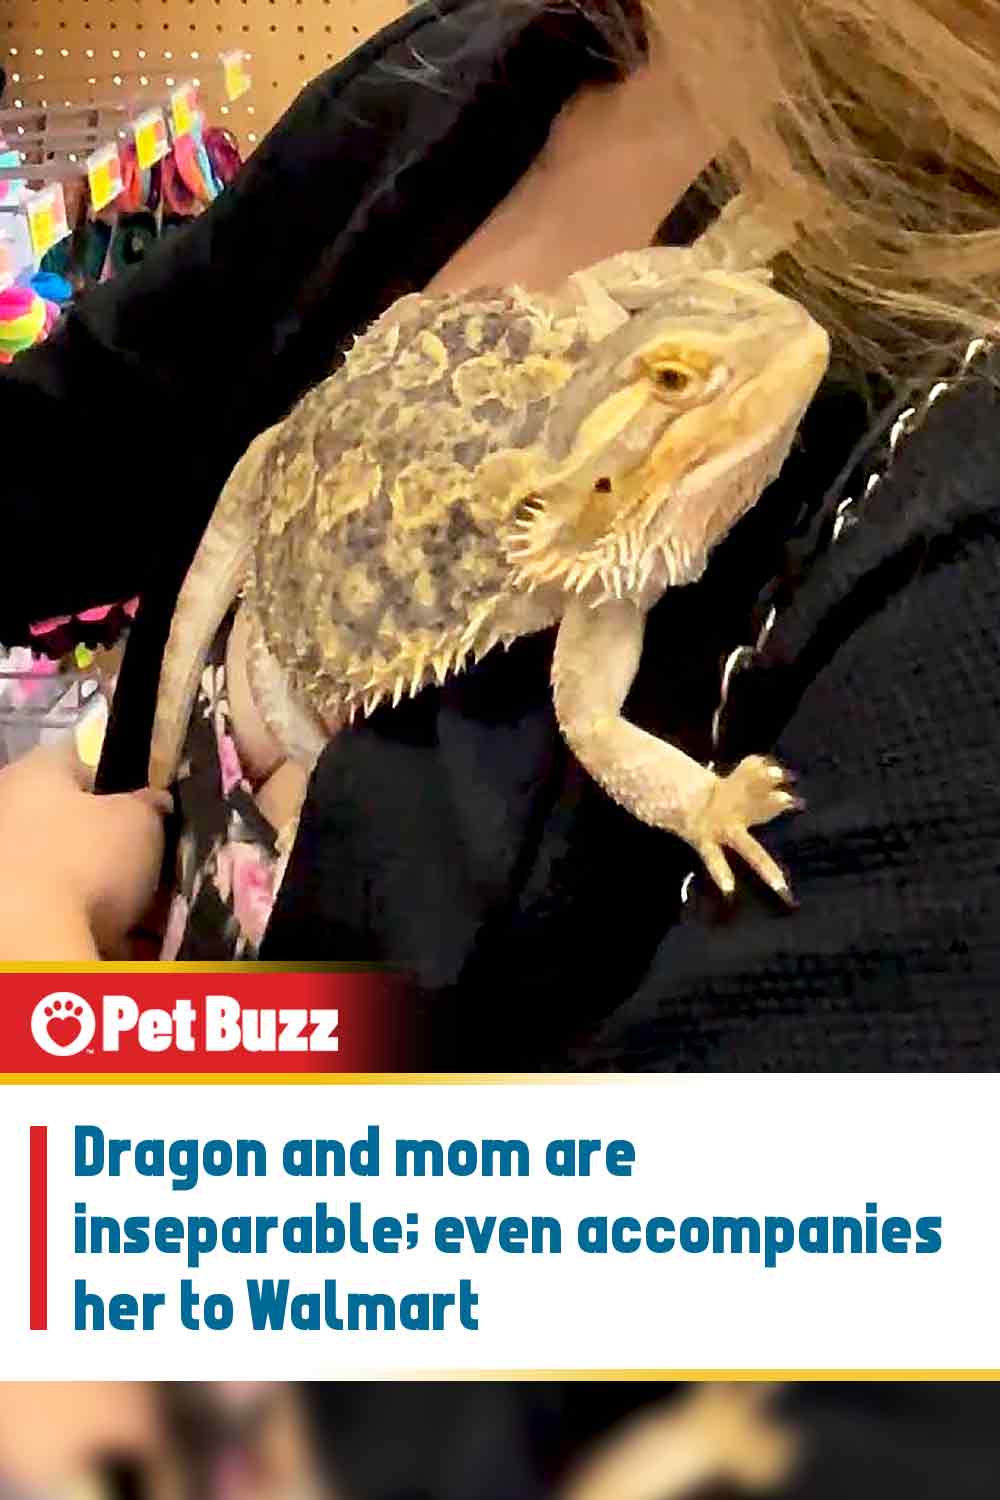 Dragon and mom are inseparable; even accompanies her to Walmart